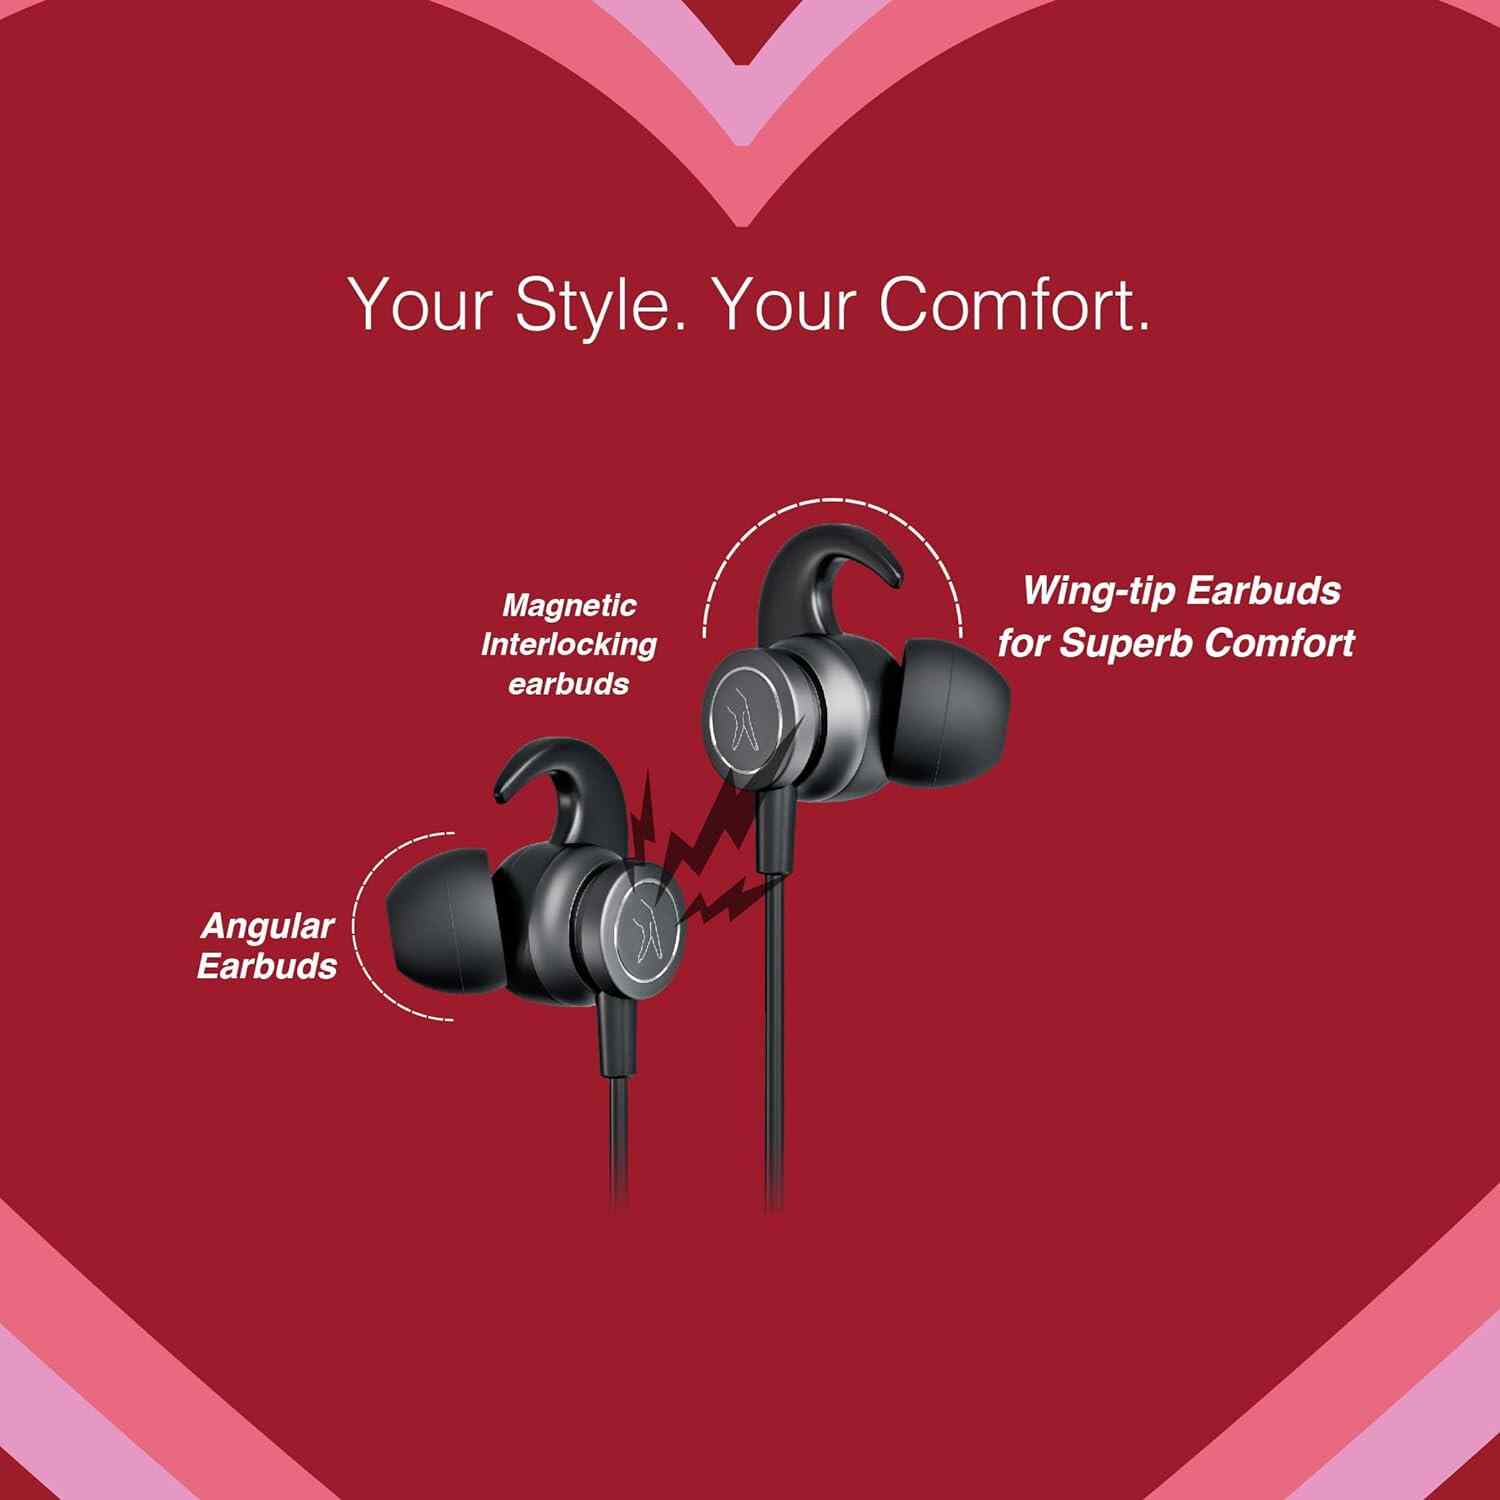 FINGERS FC-Bassitica Wireless in-Ear Bluetooth Neckband Earphones with 50-Hour Playtime, 6 Unique Music Modes, Mic with Surround Noise Cancellation SNC™ Technology, (Rich Grey)